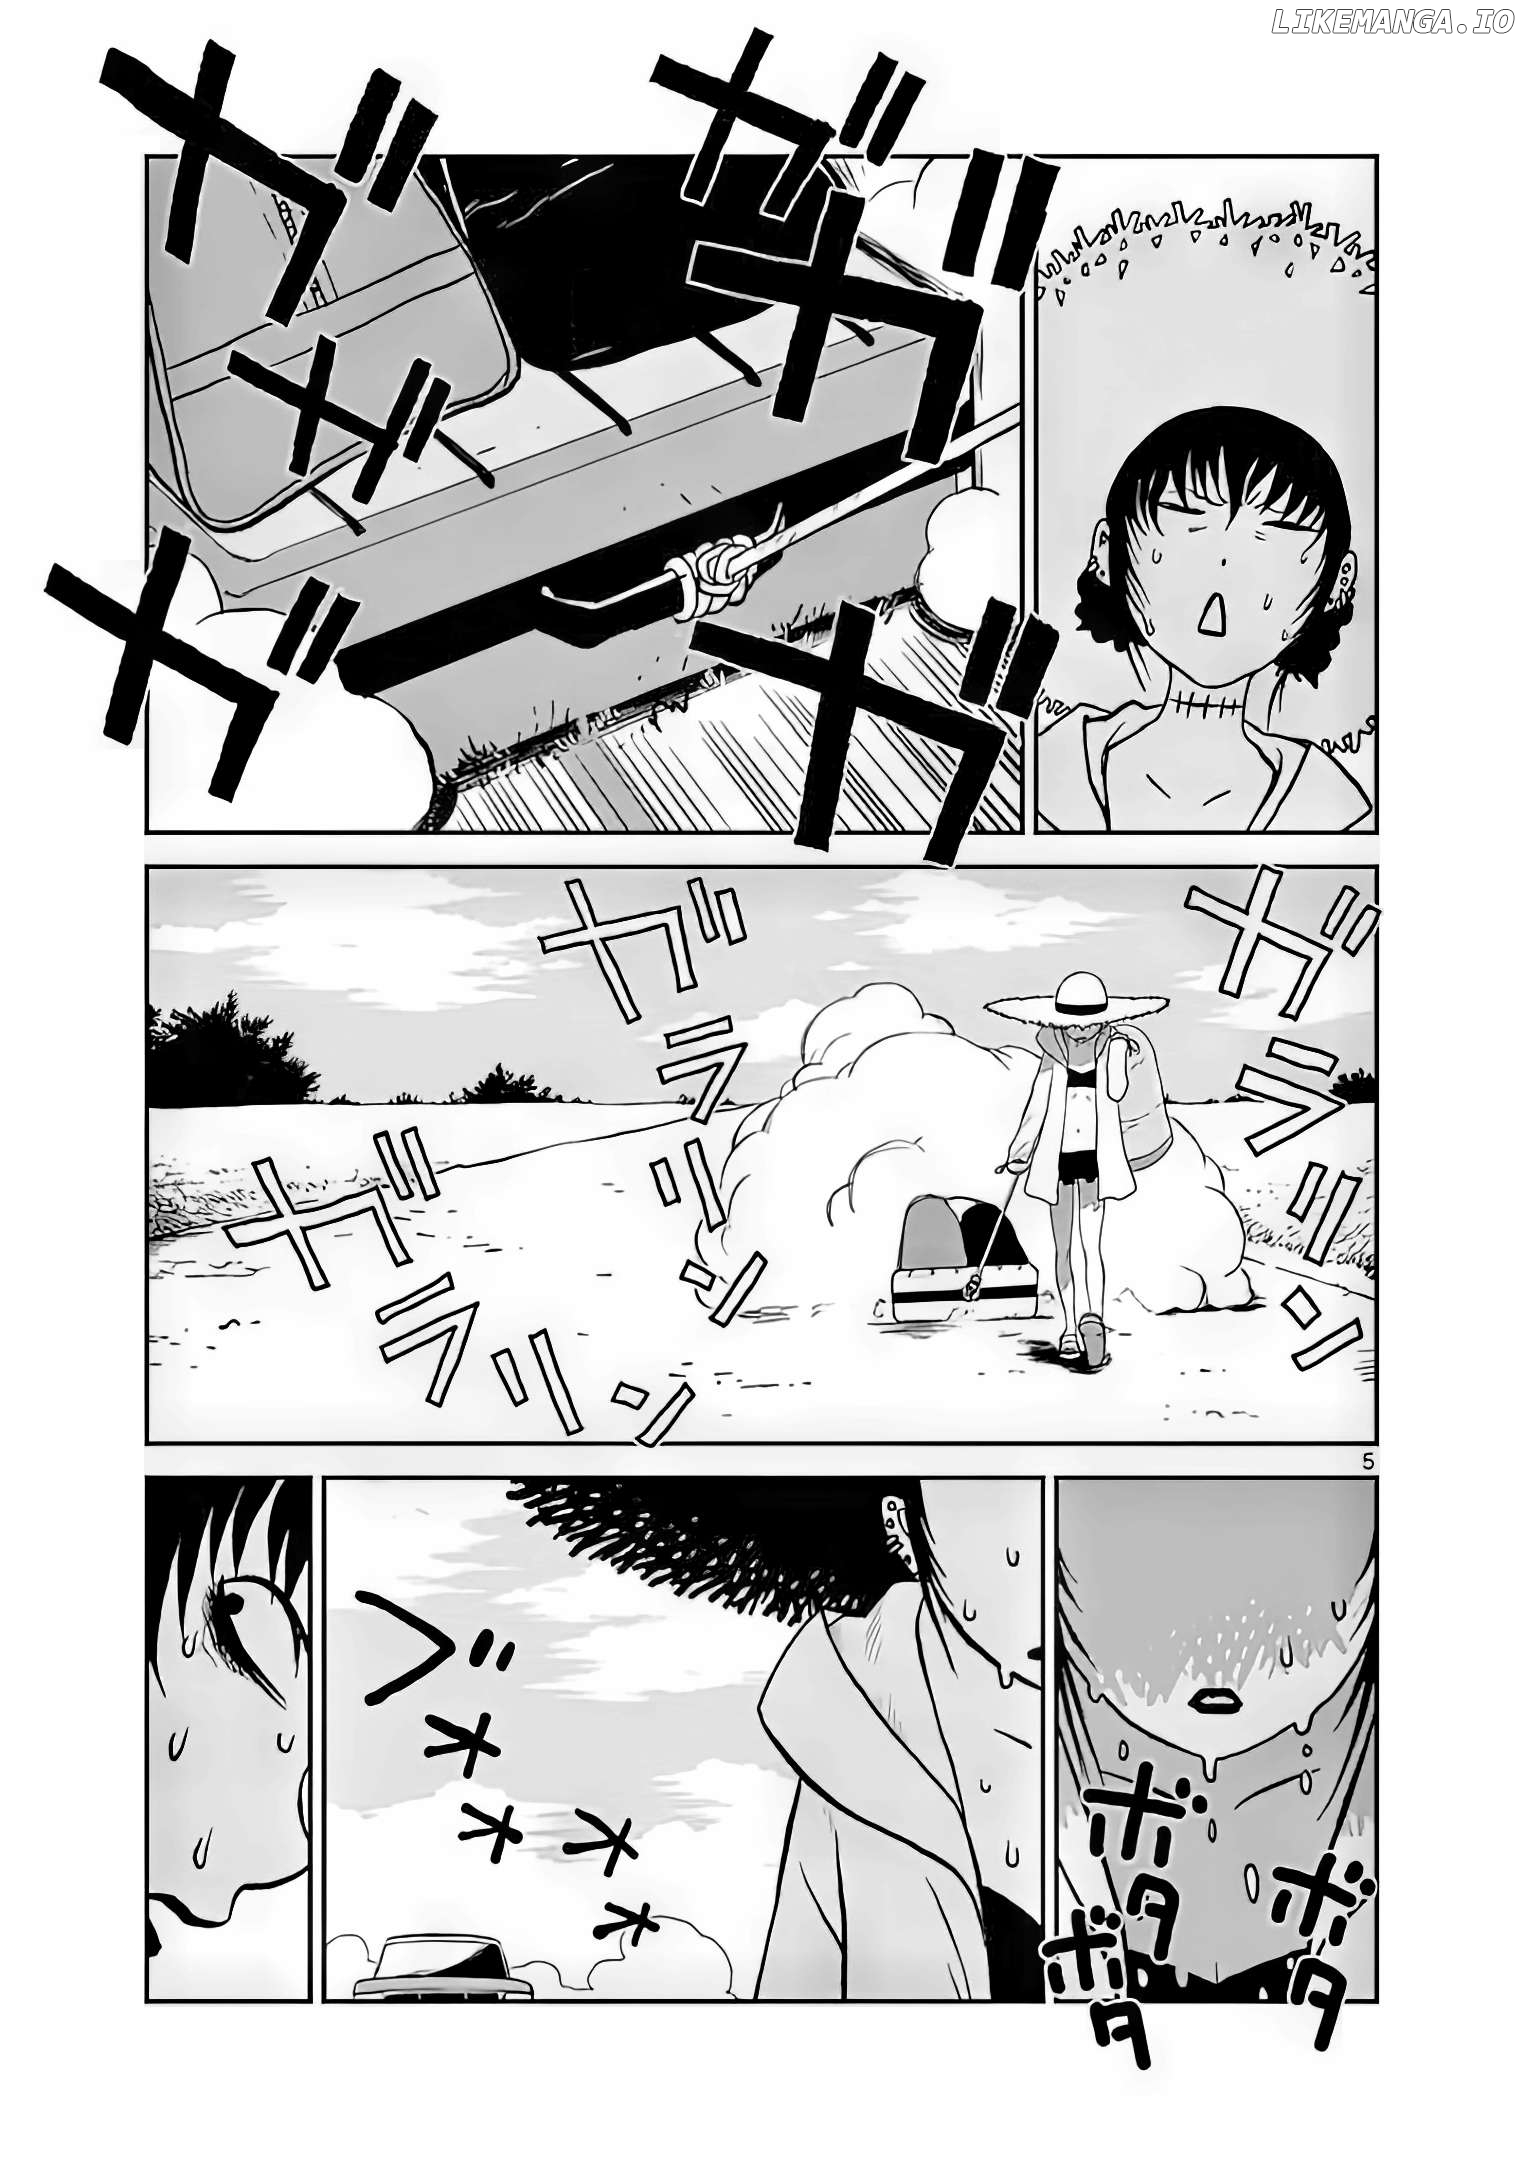 Black Lagoon: Sawyer the Cleaner - Dismemberment! Gore Gore Girl Chapter 3 - page 5